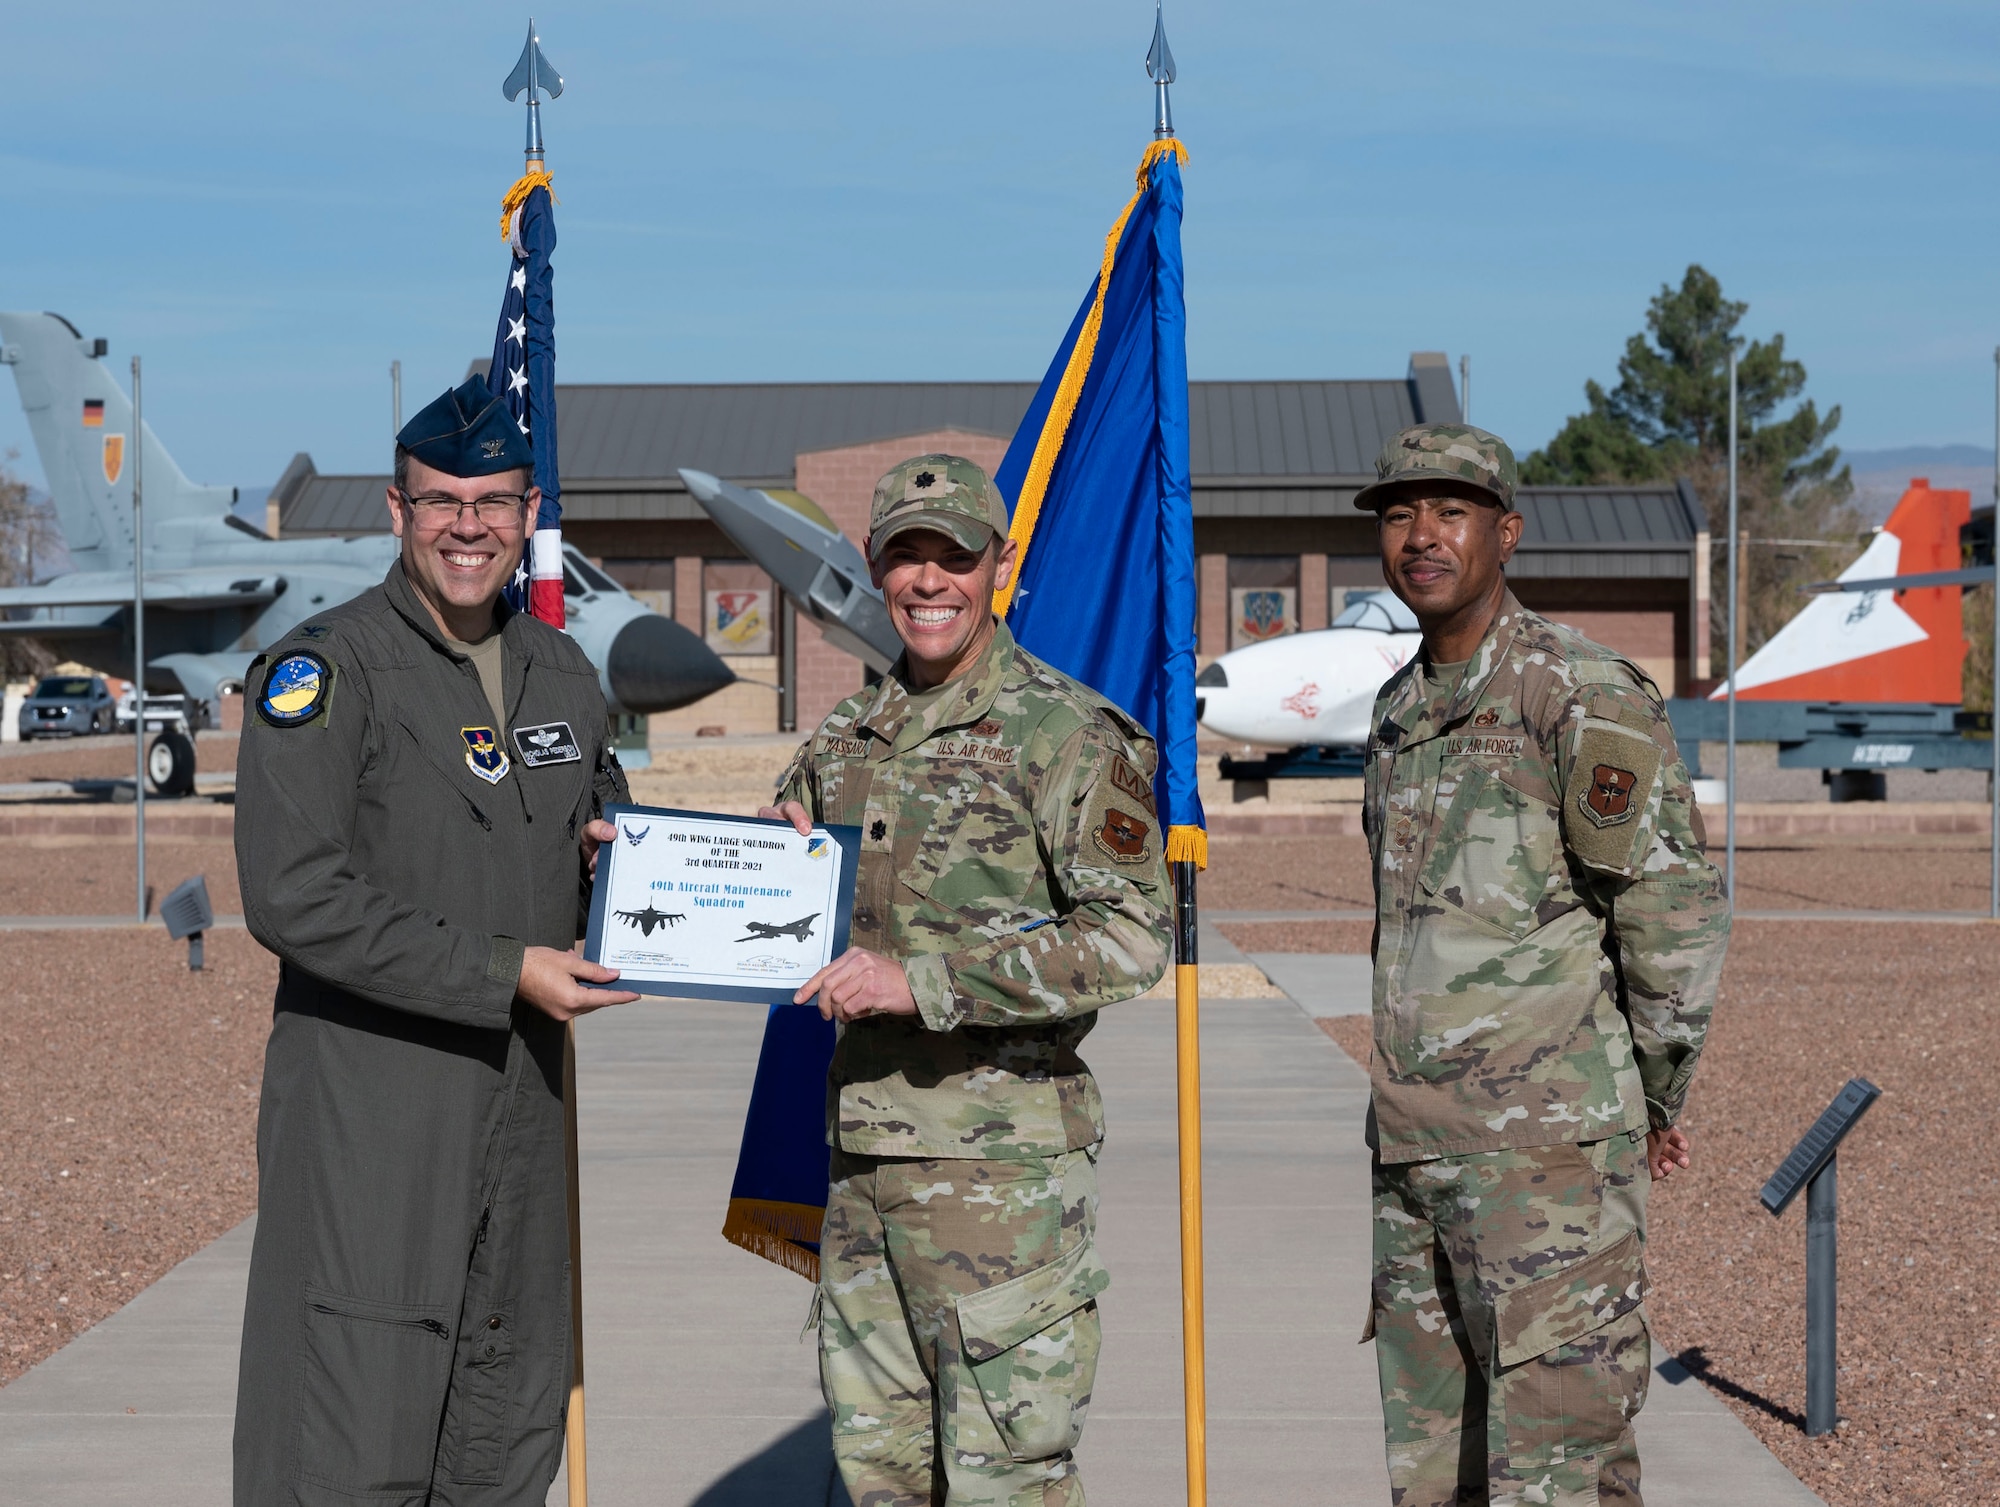 A representative from the 49th Aircraft Maintenance Squadron accepts the large unit of the quarter award during the 49th Wing’s 3rd quarter award ceremony, Nov. 19, 2021, on Holloman Air Force Base, New Mexico. Quarterly award winners were selected based on their technical expertise, demonstration of leadership and job performance. (U.S. Air Force photo by Airman 1st Class Antonio Salfran)